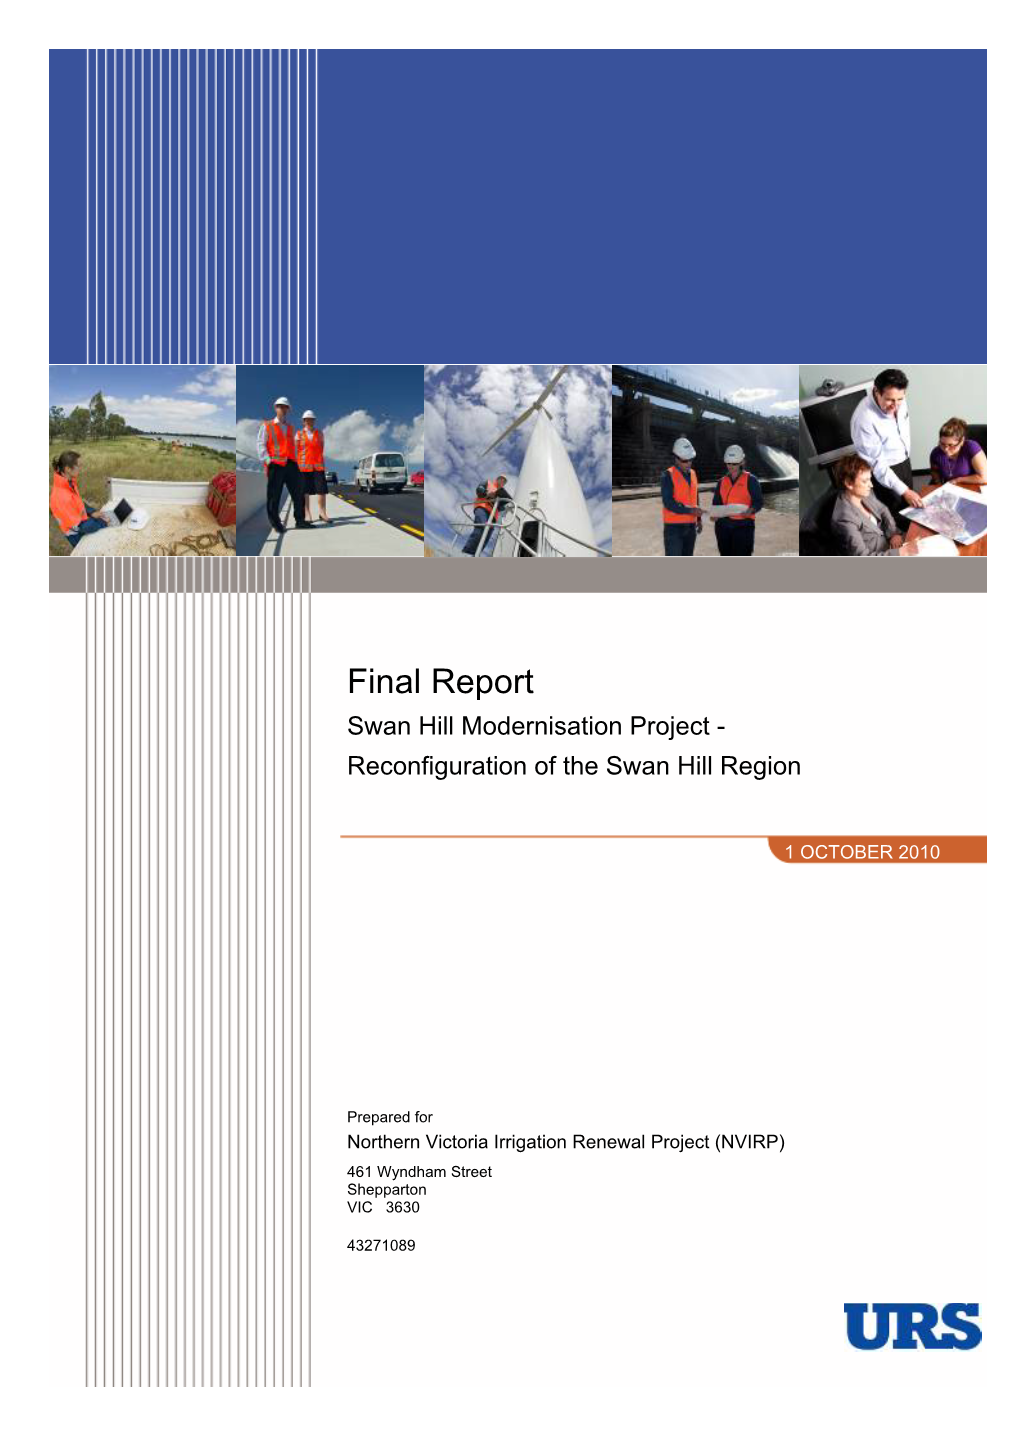 Final Report Swan Hill Modernisation Project - Reconfiguration of the Swan Hill Region